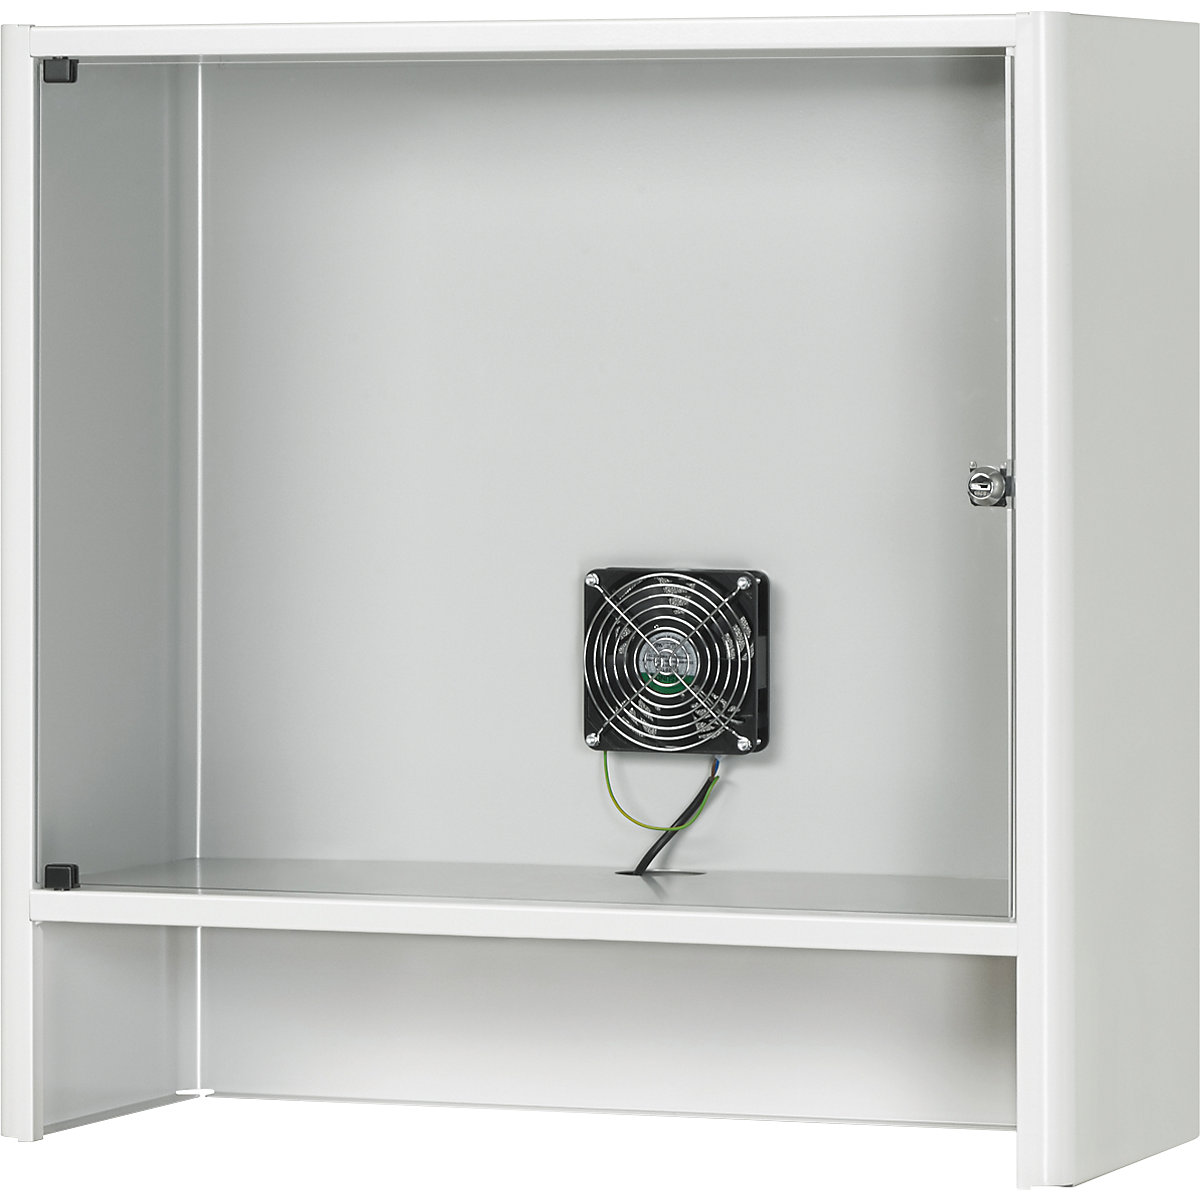 Monitor housing with integrated ventilation fan – RAU